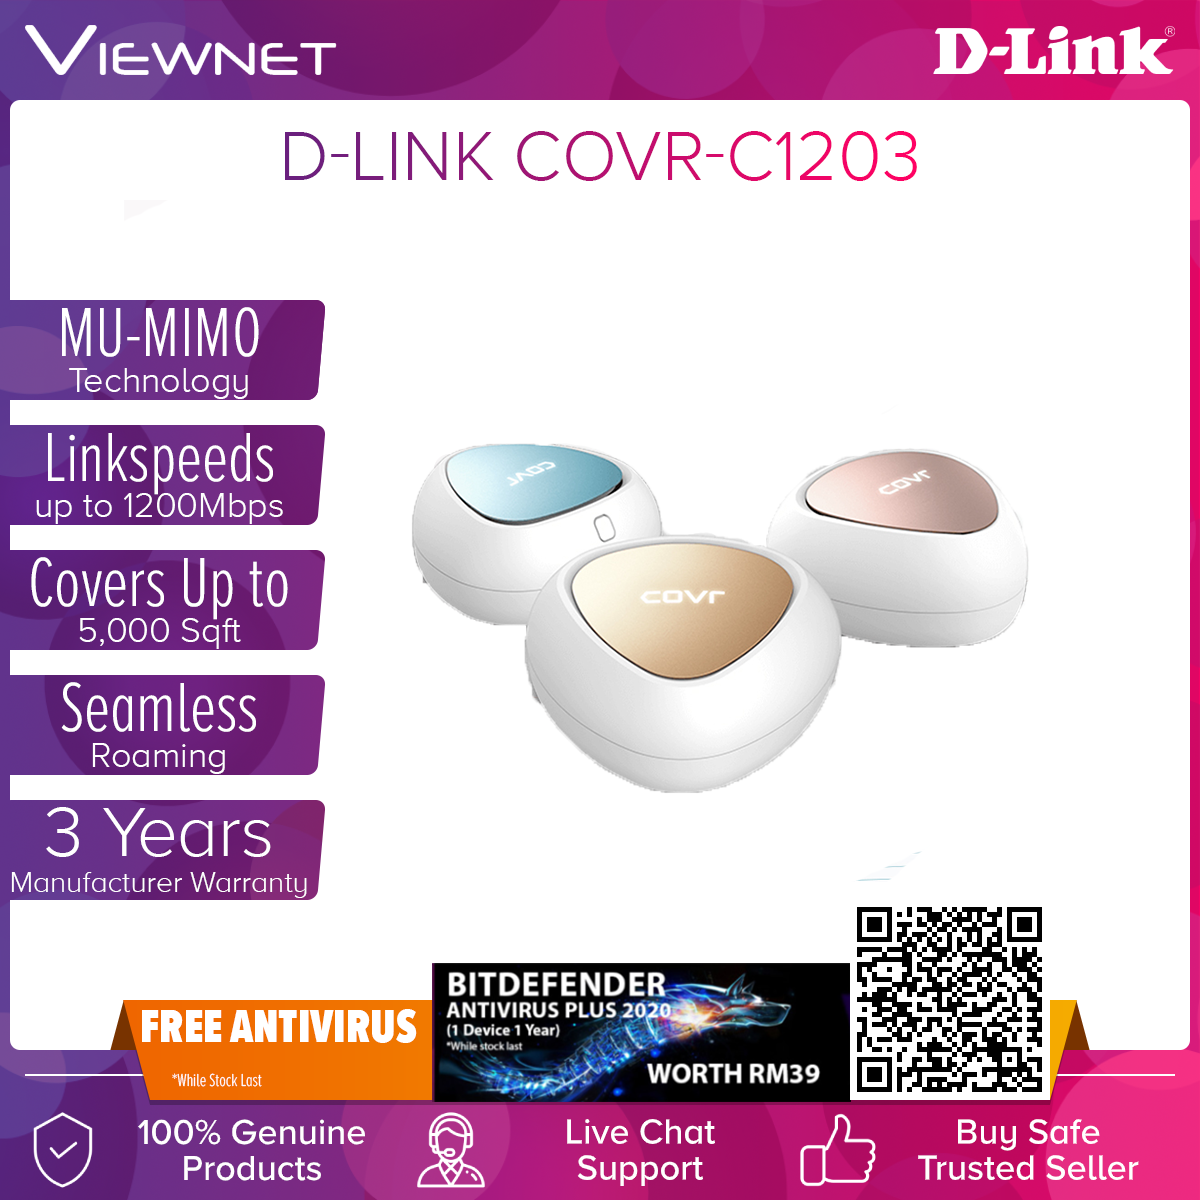 D-Link COVR-C1203 Mesh WiFi Network System Gigabit Dual Band Wave 2 Whole Home Wireless Wi-Fi Router